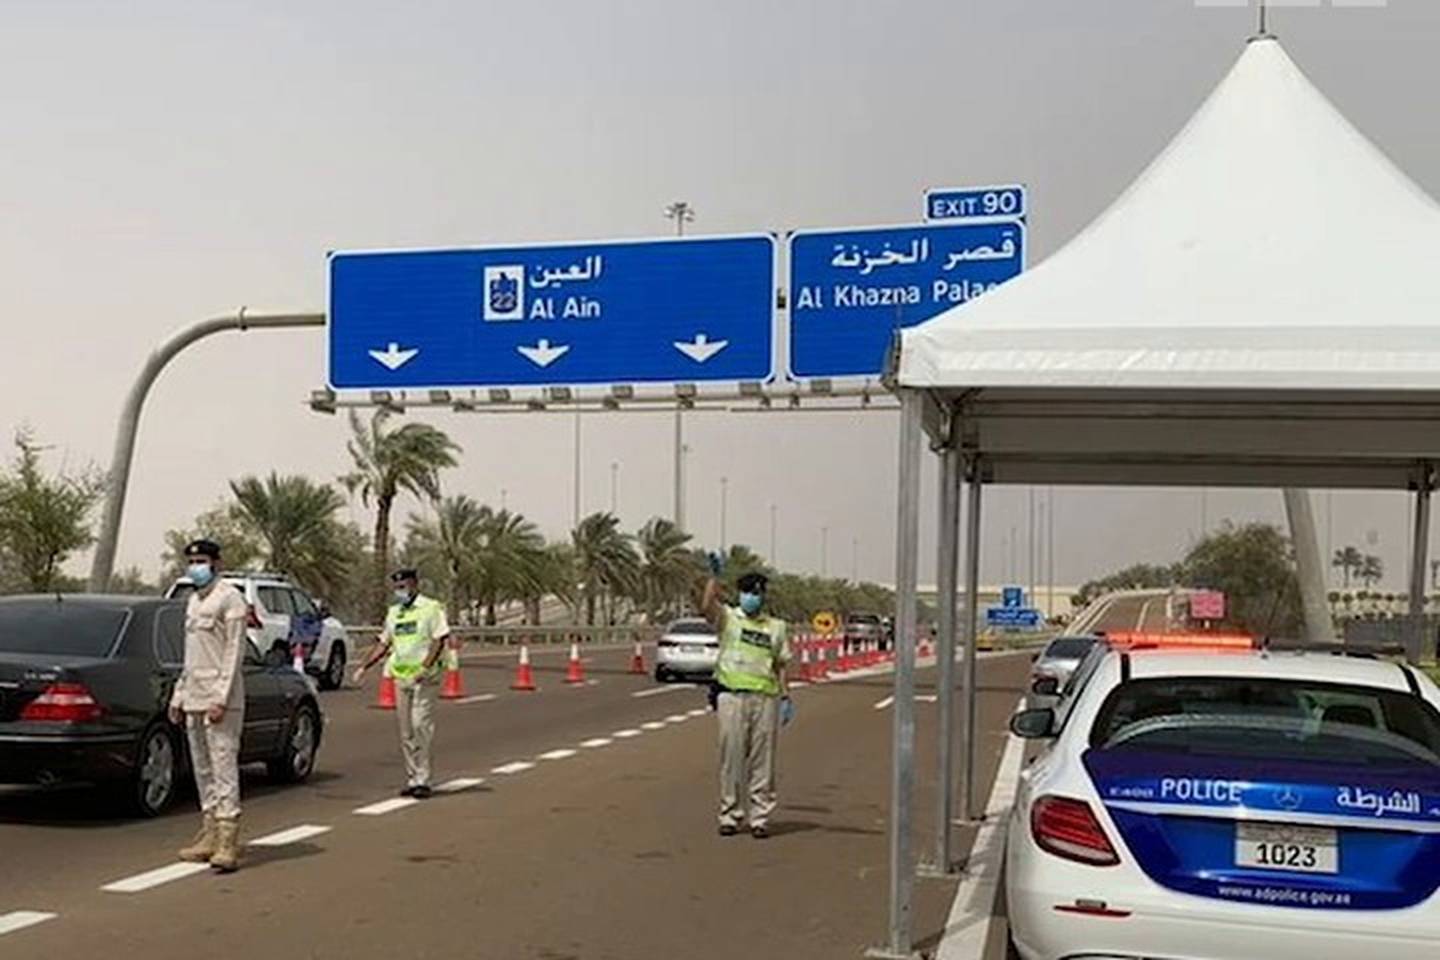 Entry to Abu Dhabi allowed with negative Covid-19 test